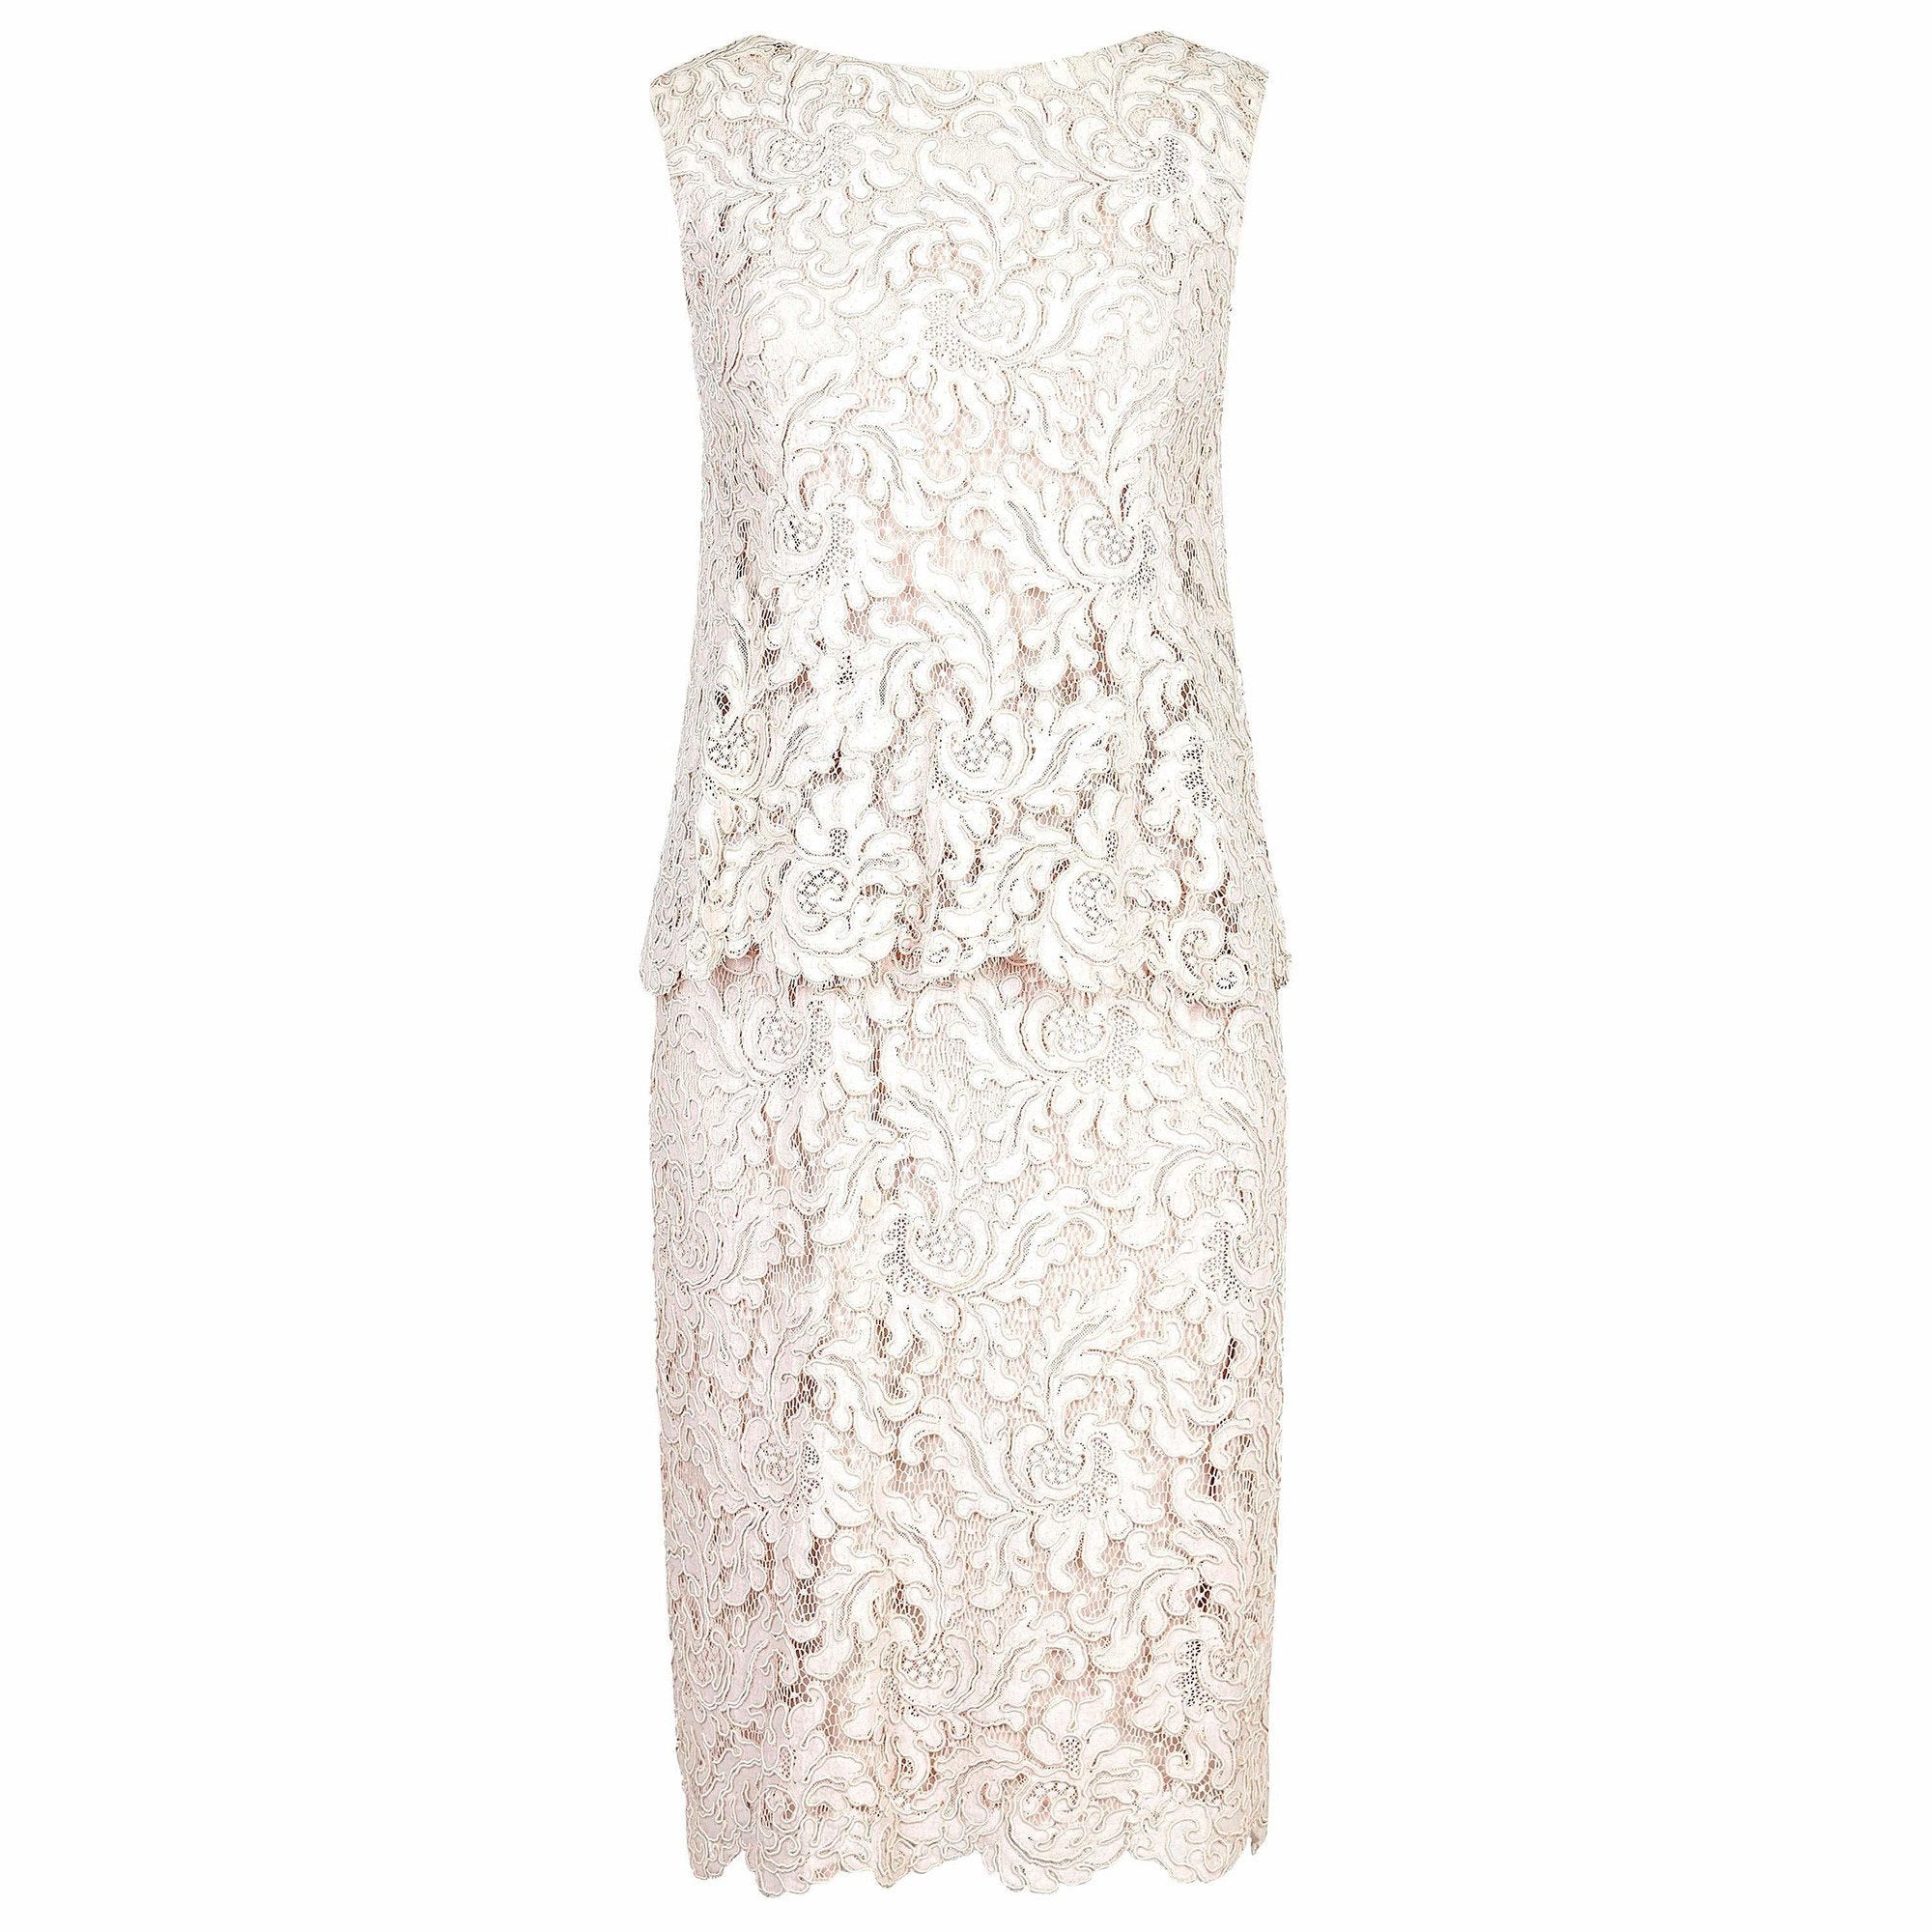 ARCHIVE - 1960s Pink and White Lace Occasion Dress